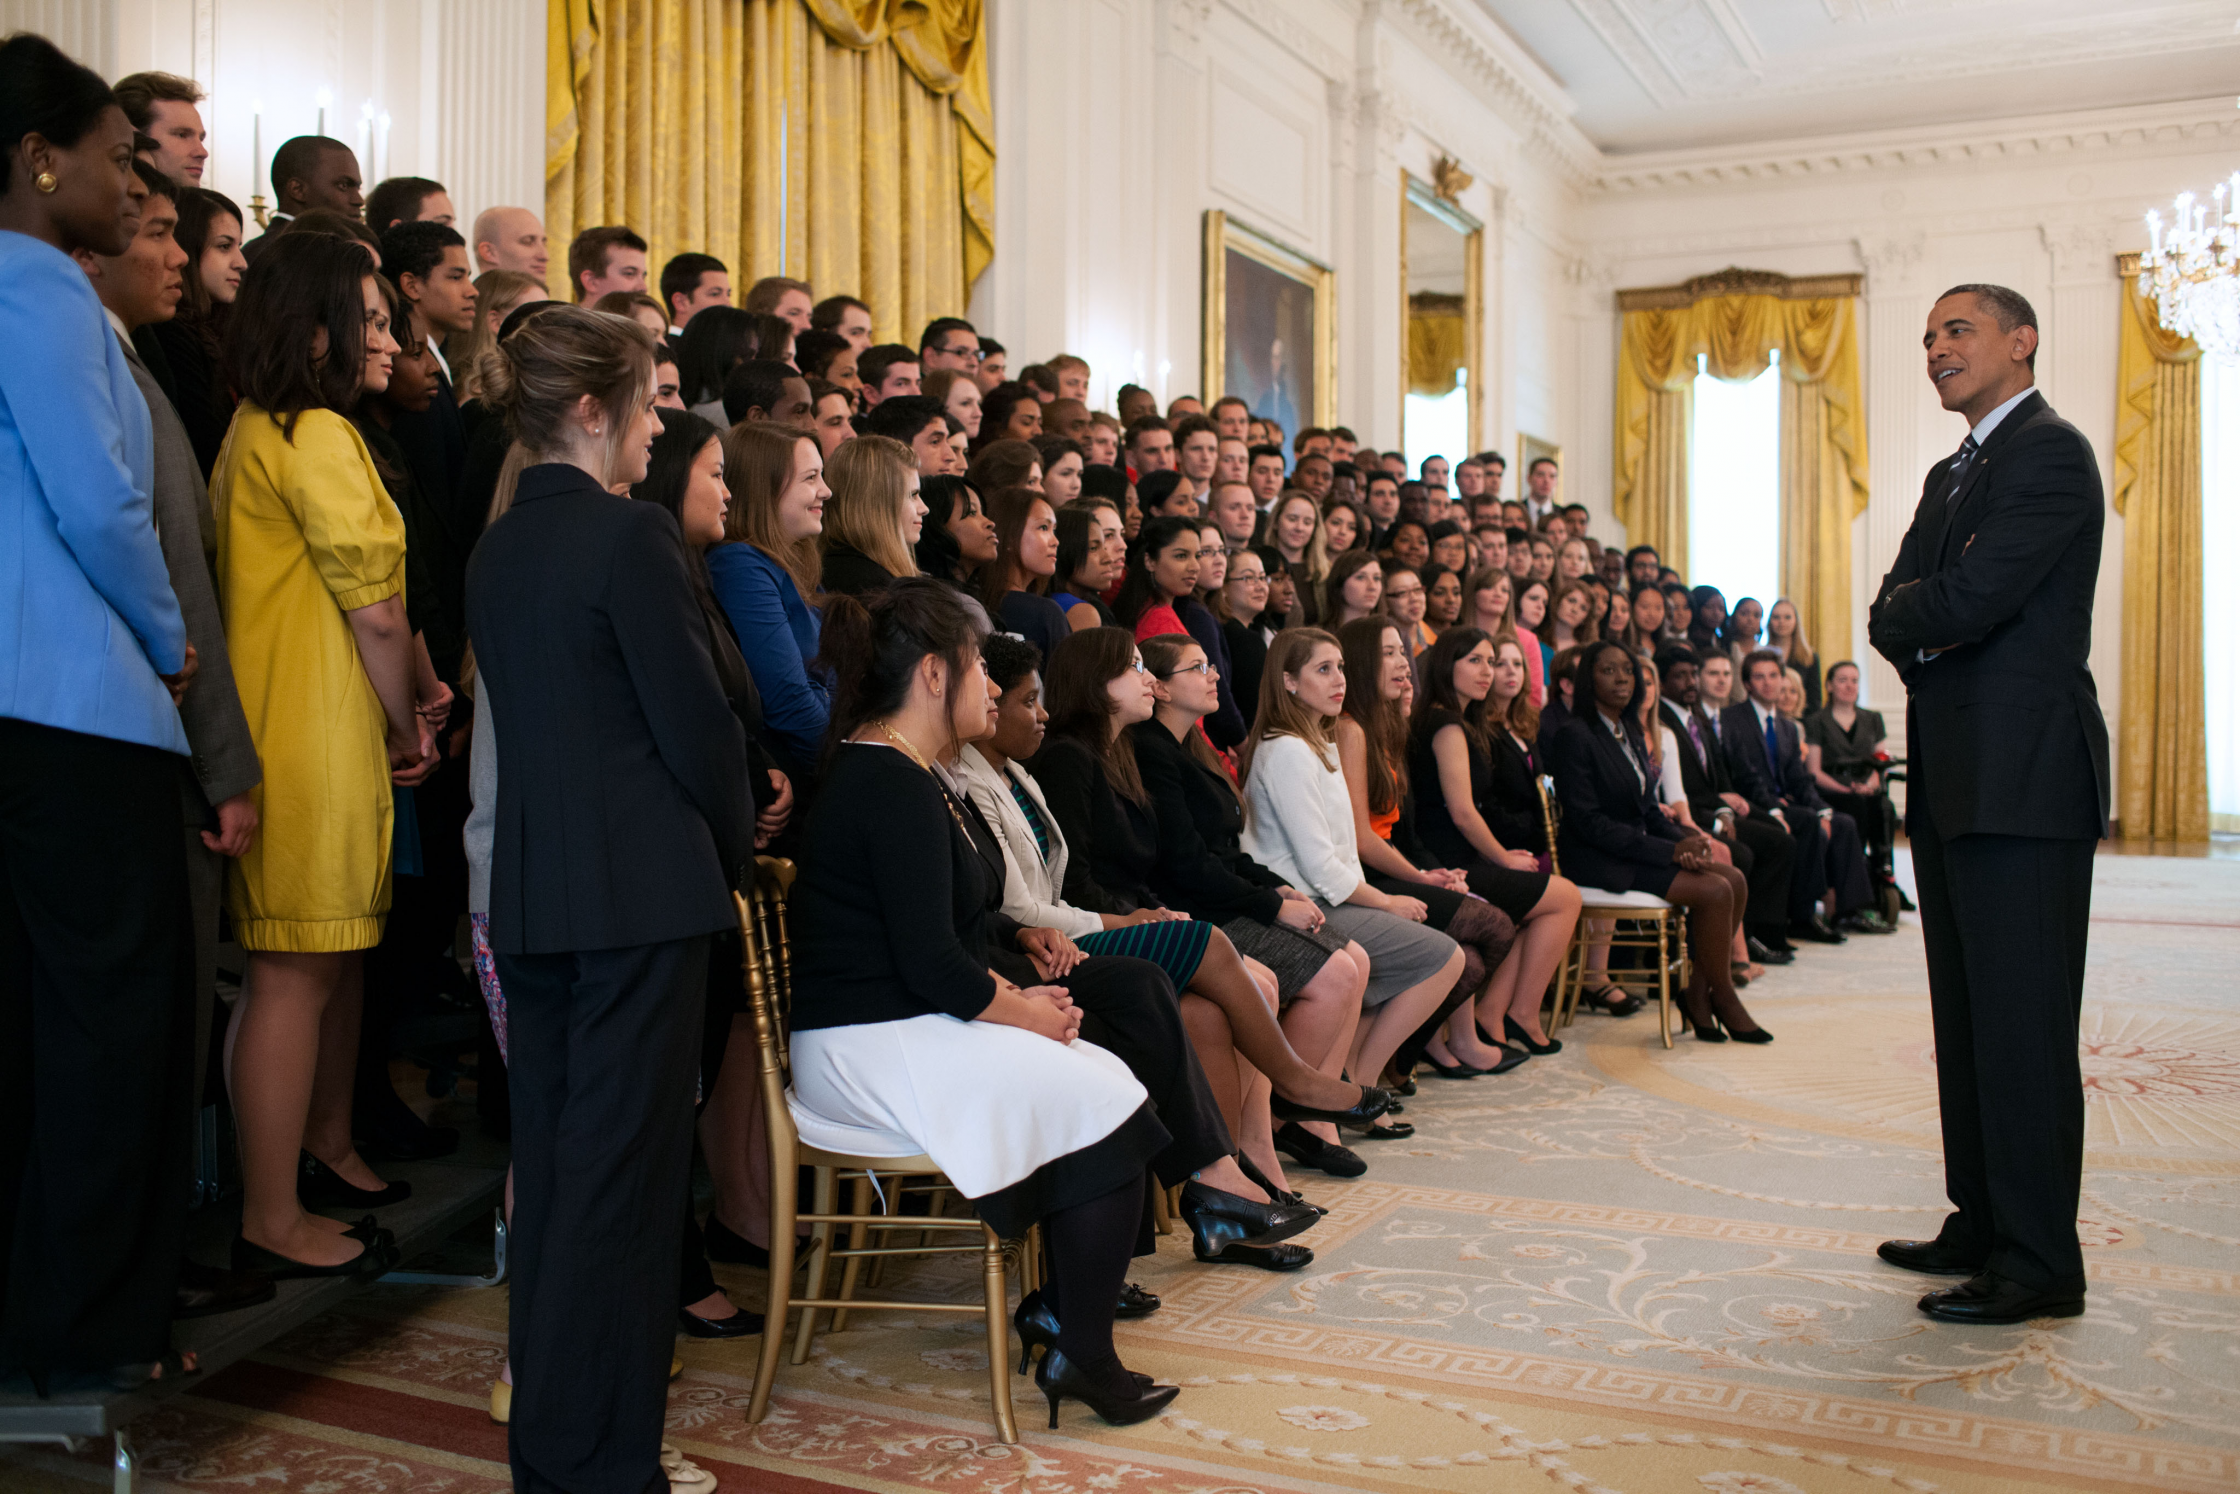 President Barack Obama talks with members of the 2012 Spring White House intern class before a group photo in the East Room of the White House, April 26, 2012. (Official White House Photo by Pete Souza)